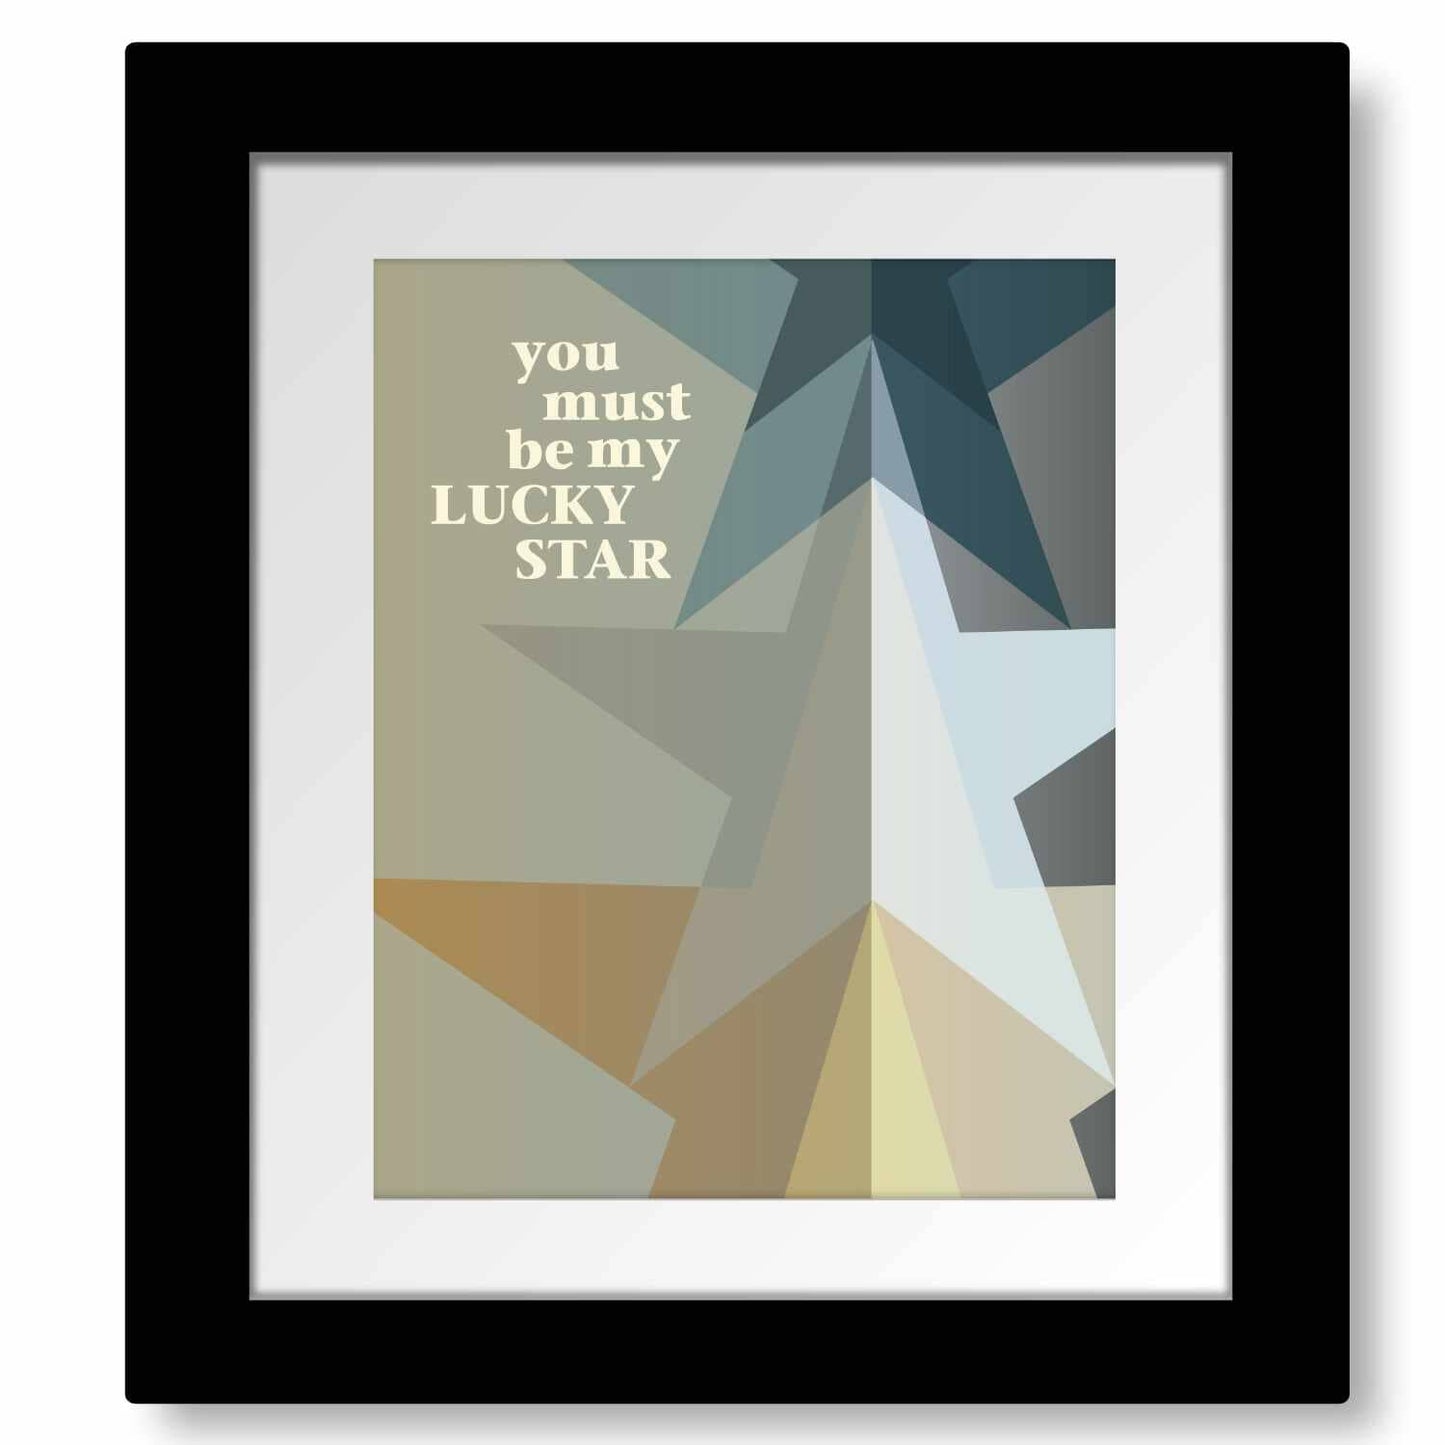 Lucky Star by Madonna - Song Lyric Art Retro Music Print Song Lyrics Art Song Lyrics Art 8x10 Framed Matted Print 